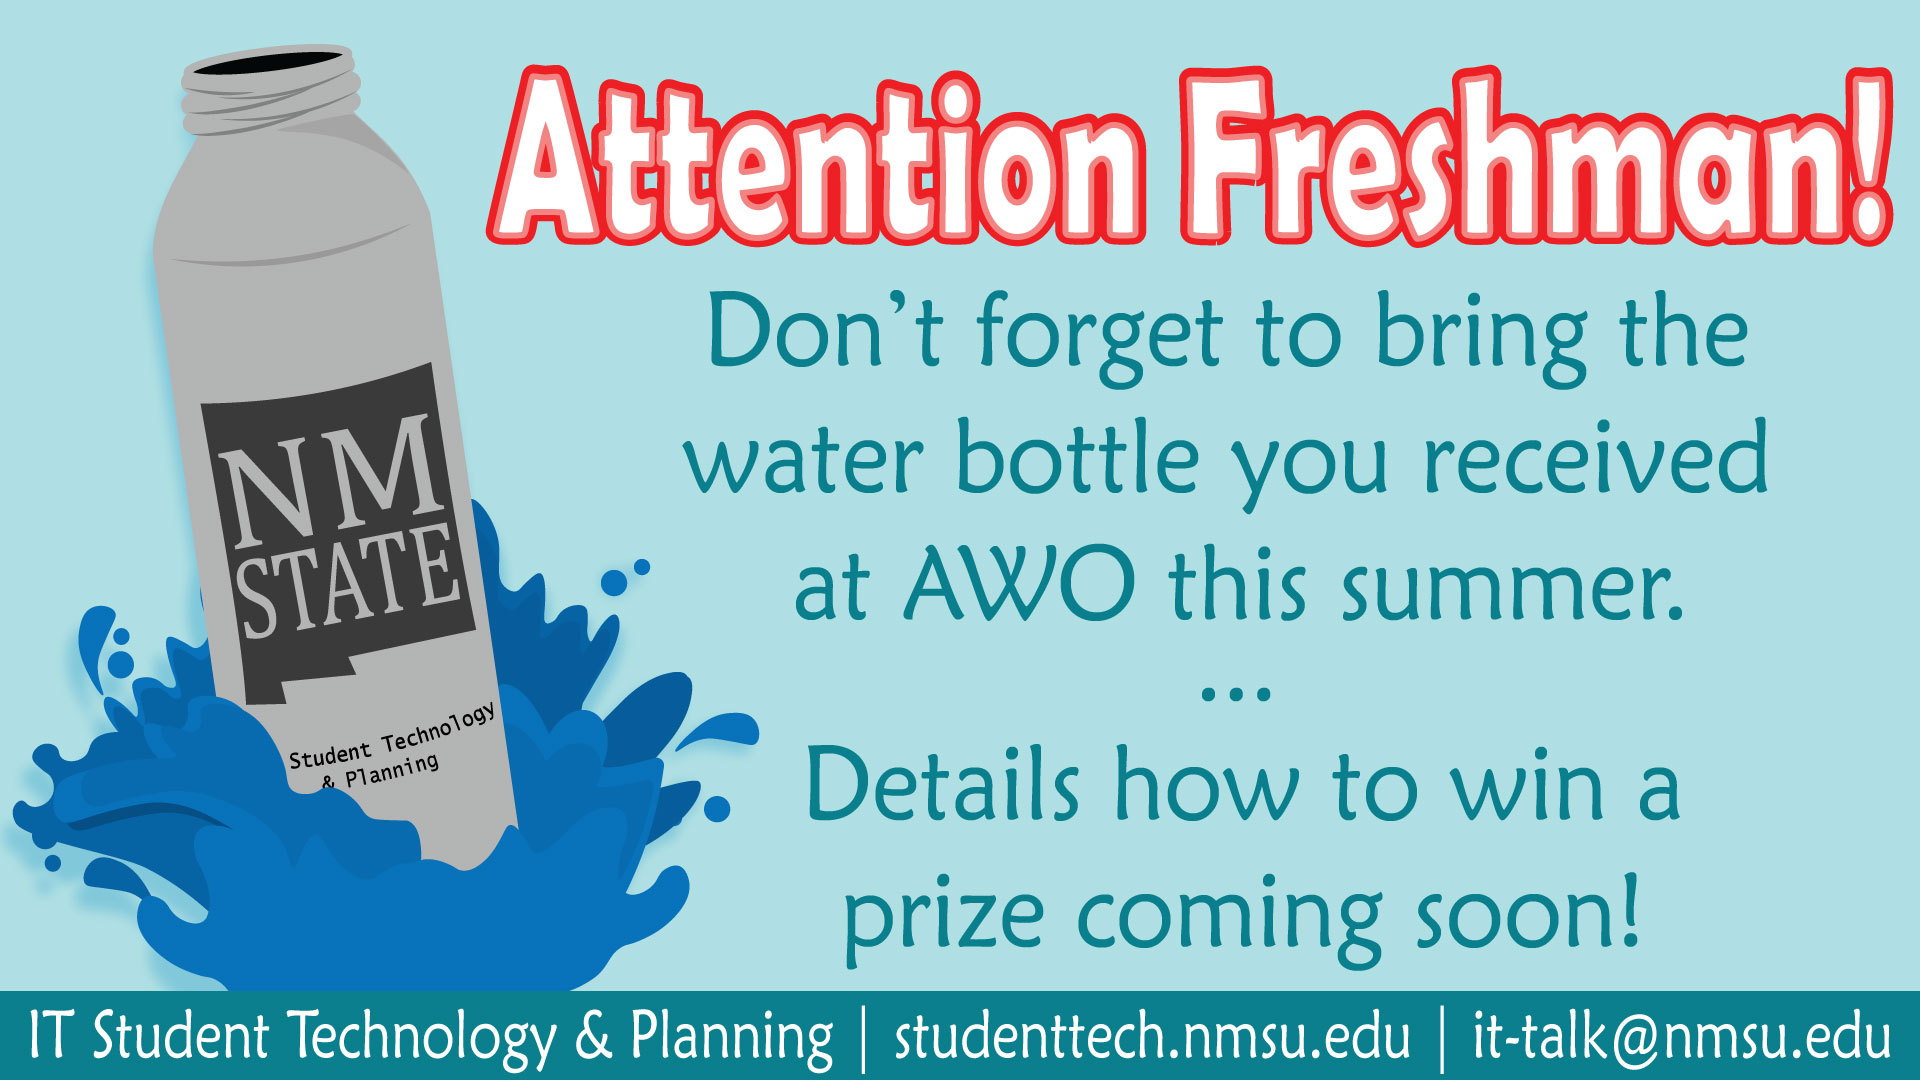 Attention Freshman! Don't forget to bring the water bottle you received at AWO this summer. Details on how to win a prize coming soon!